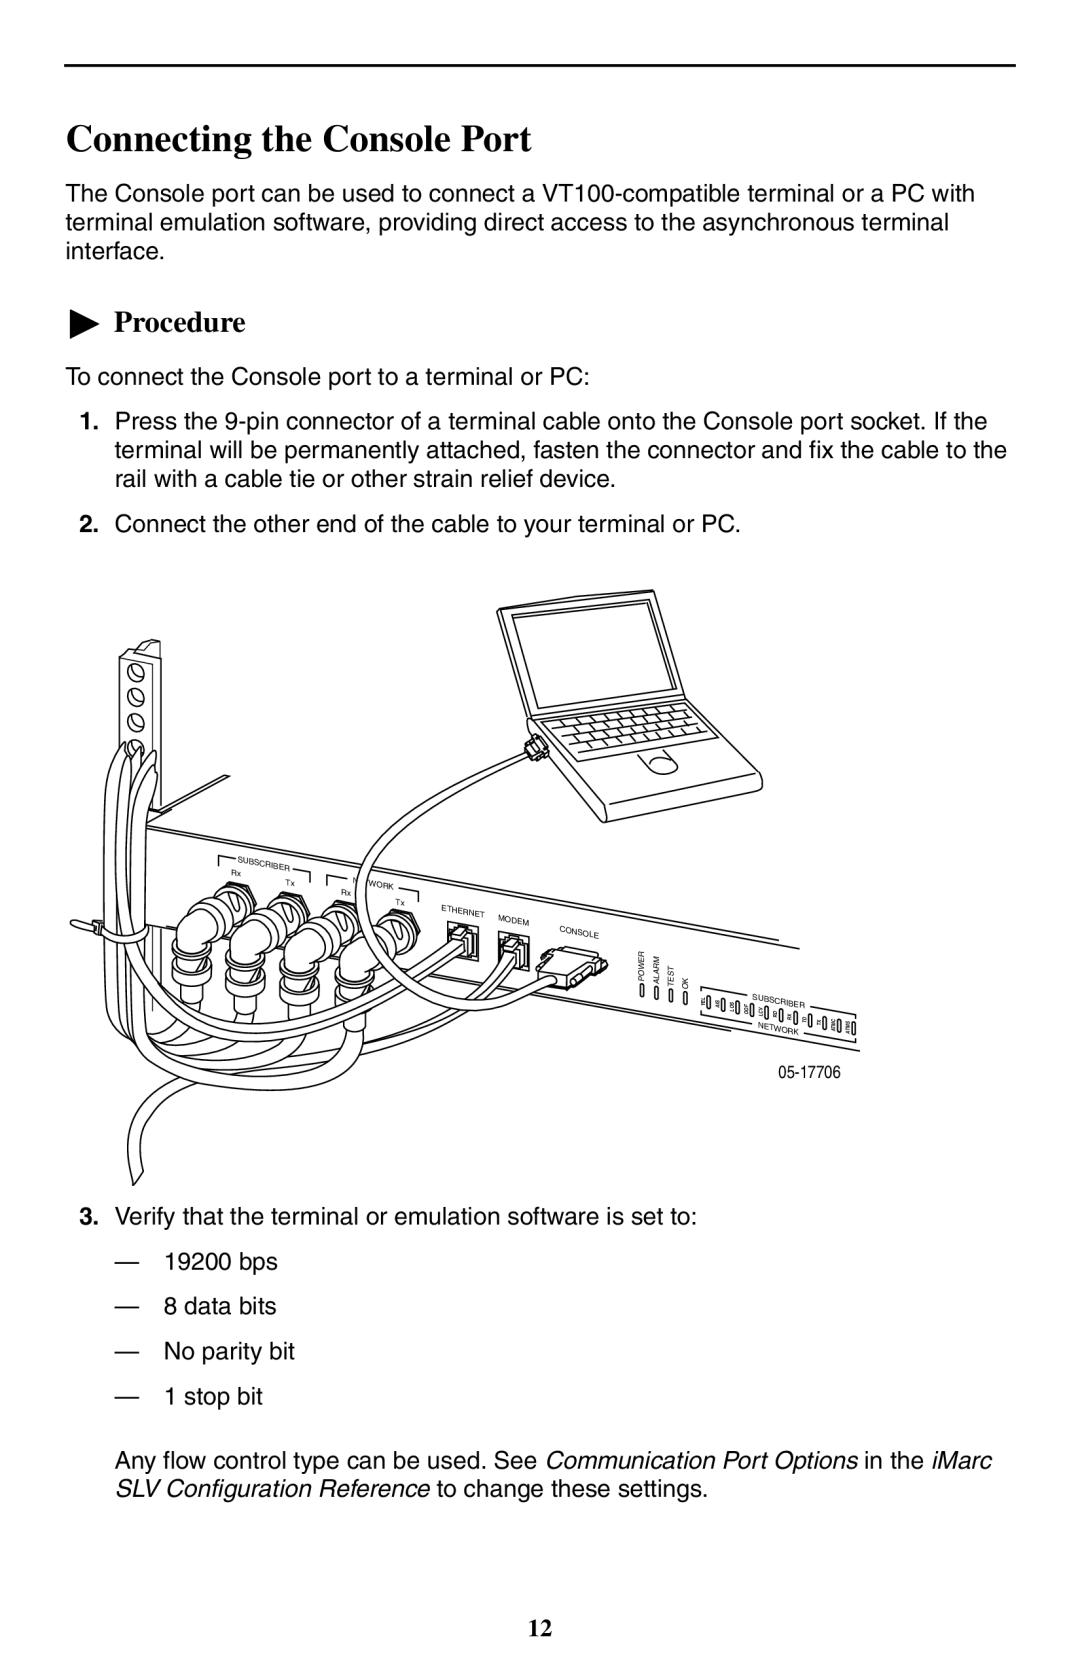 Paradyne 9550 DS3 installation instructions Connecting the Console Port, Procedure 